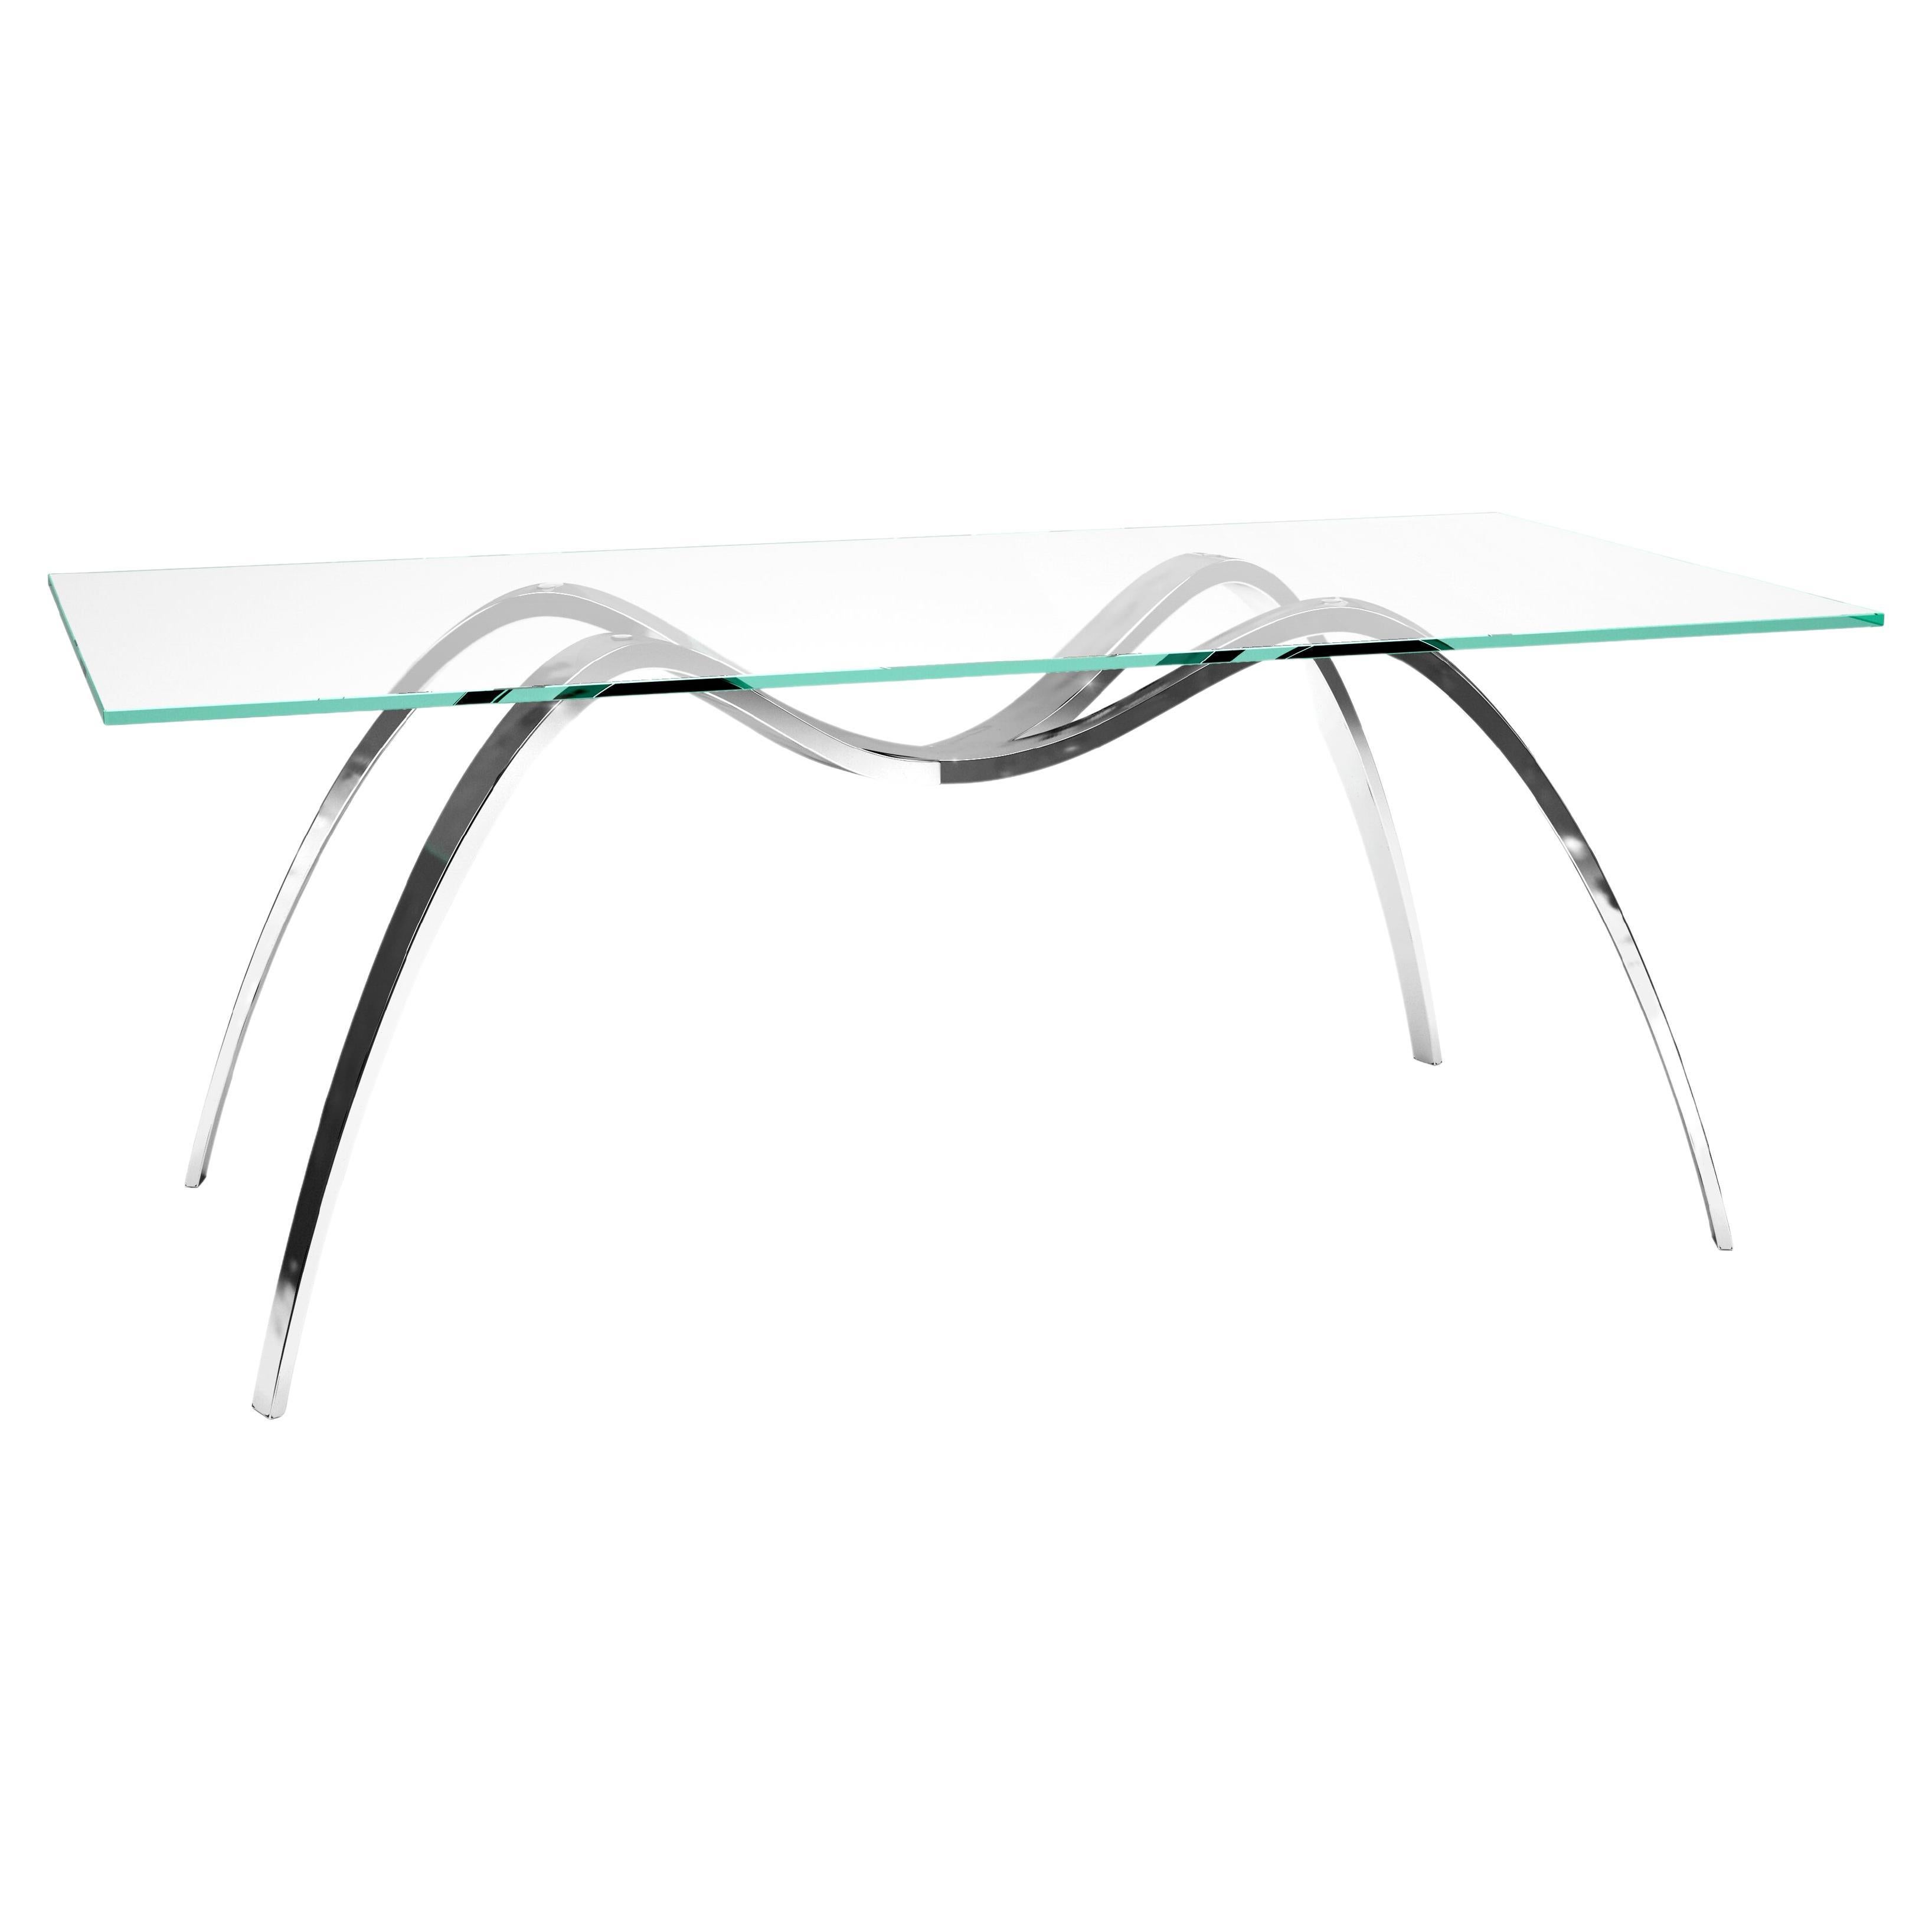 Dining Table Writing Desk Spider Leg Glass Top Mirror Steel Collectible Design For Sale